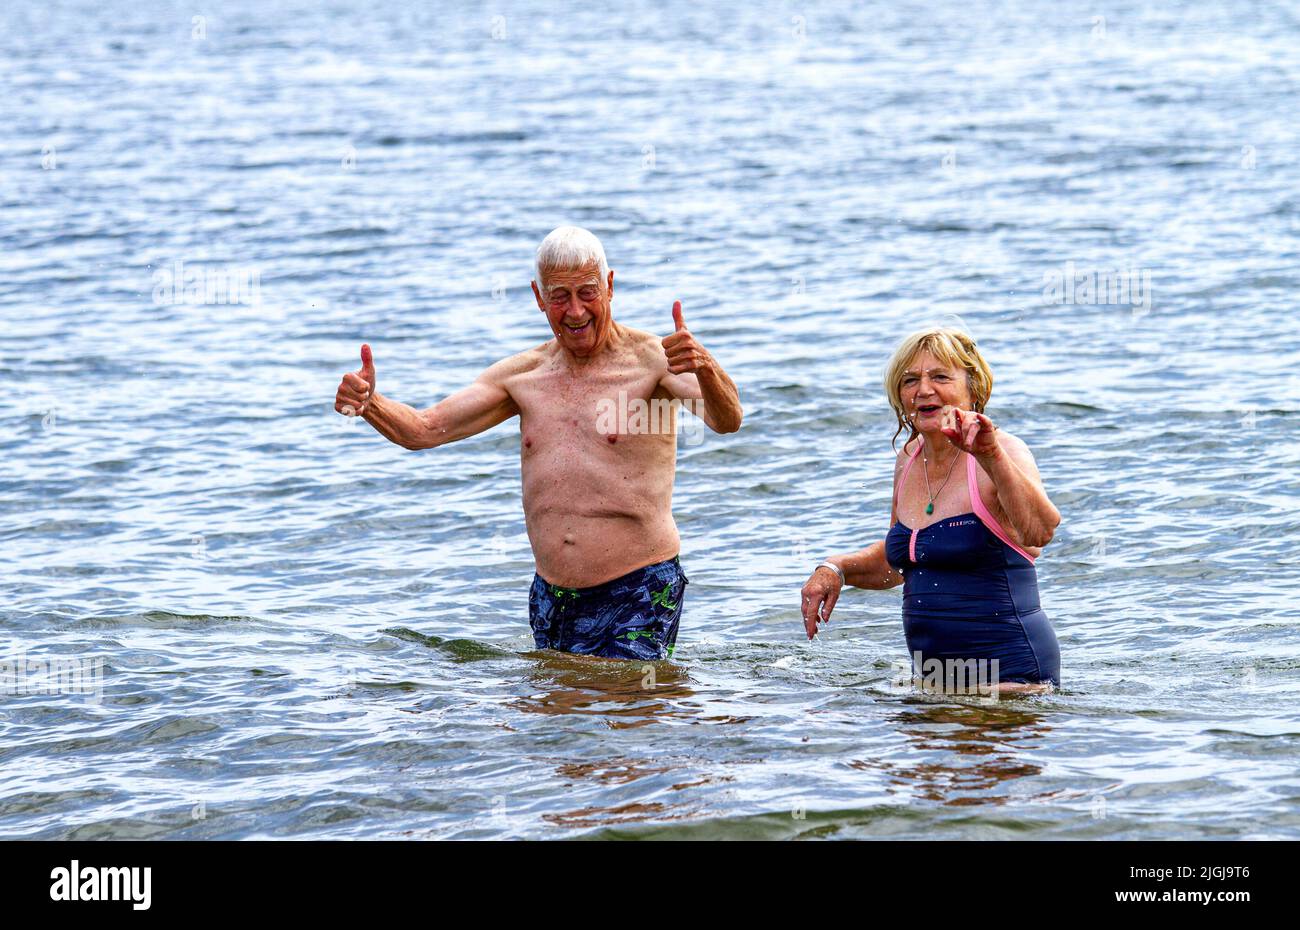 Dundee, Tayside, Scotland, UK. 11th July, 2022. UK Weather: The temperature in North East Scotland reached 24°C. The beautiful summer weather drew beach-goers and sunbathers to Dundee Broughty Ferry beach to soak up the warm July sunshine. Credit: Dundee Photographics/Alamy Live News Stock Photo